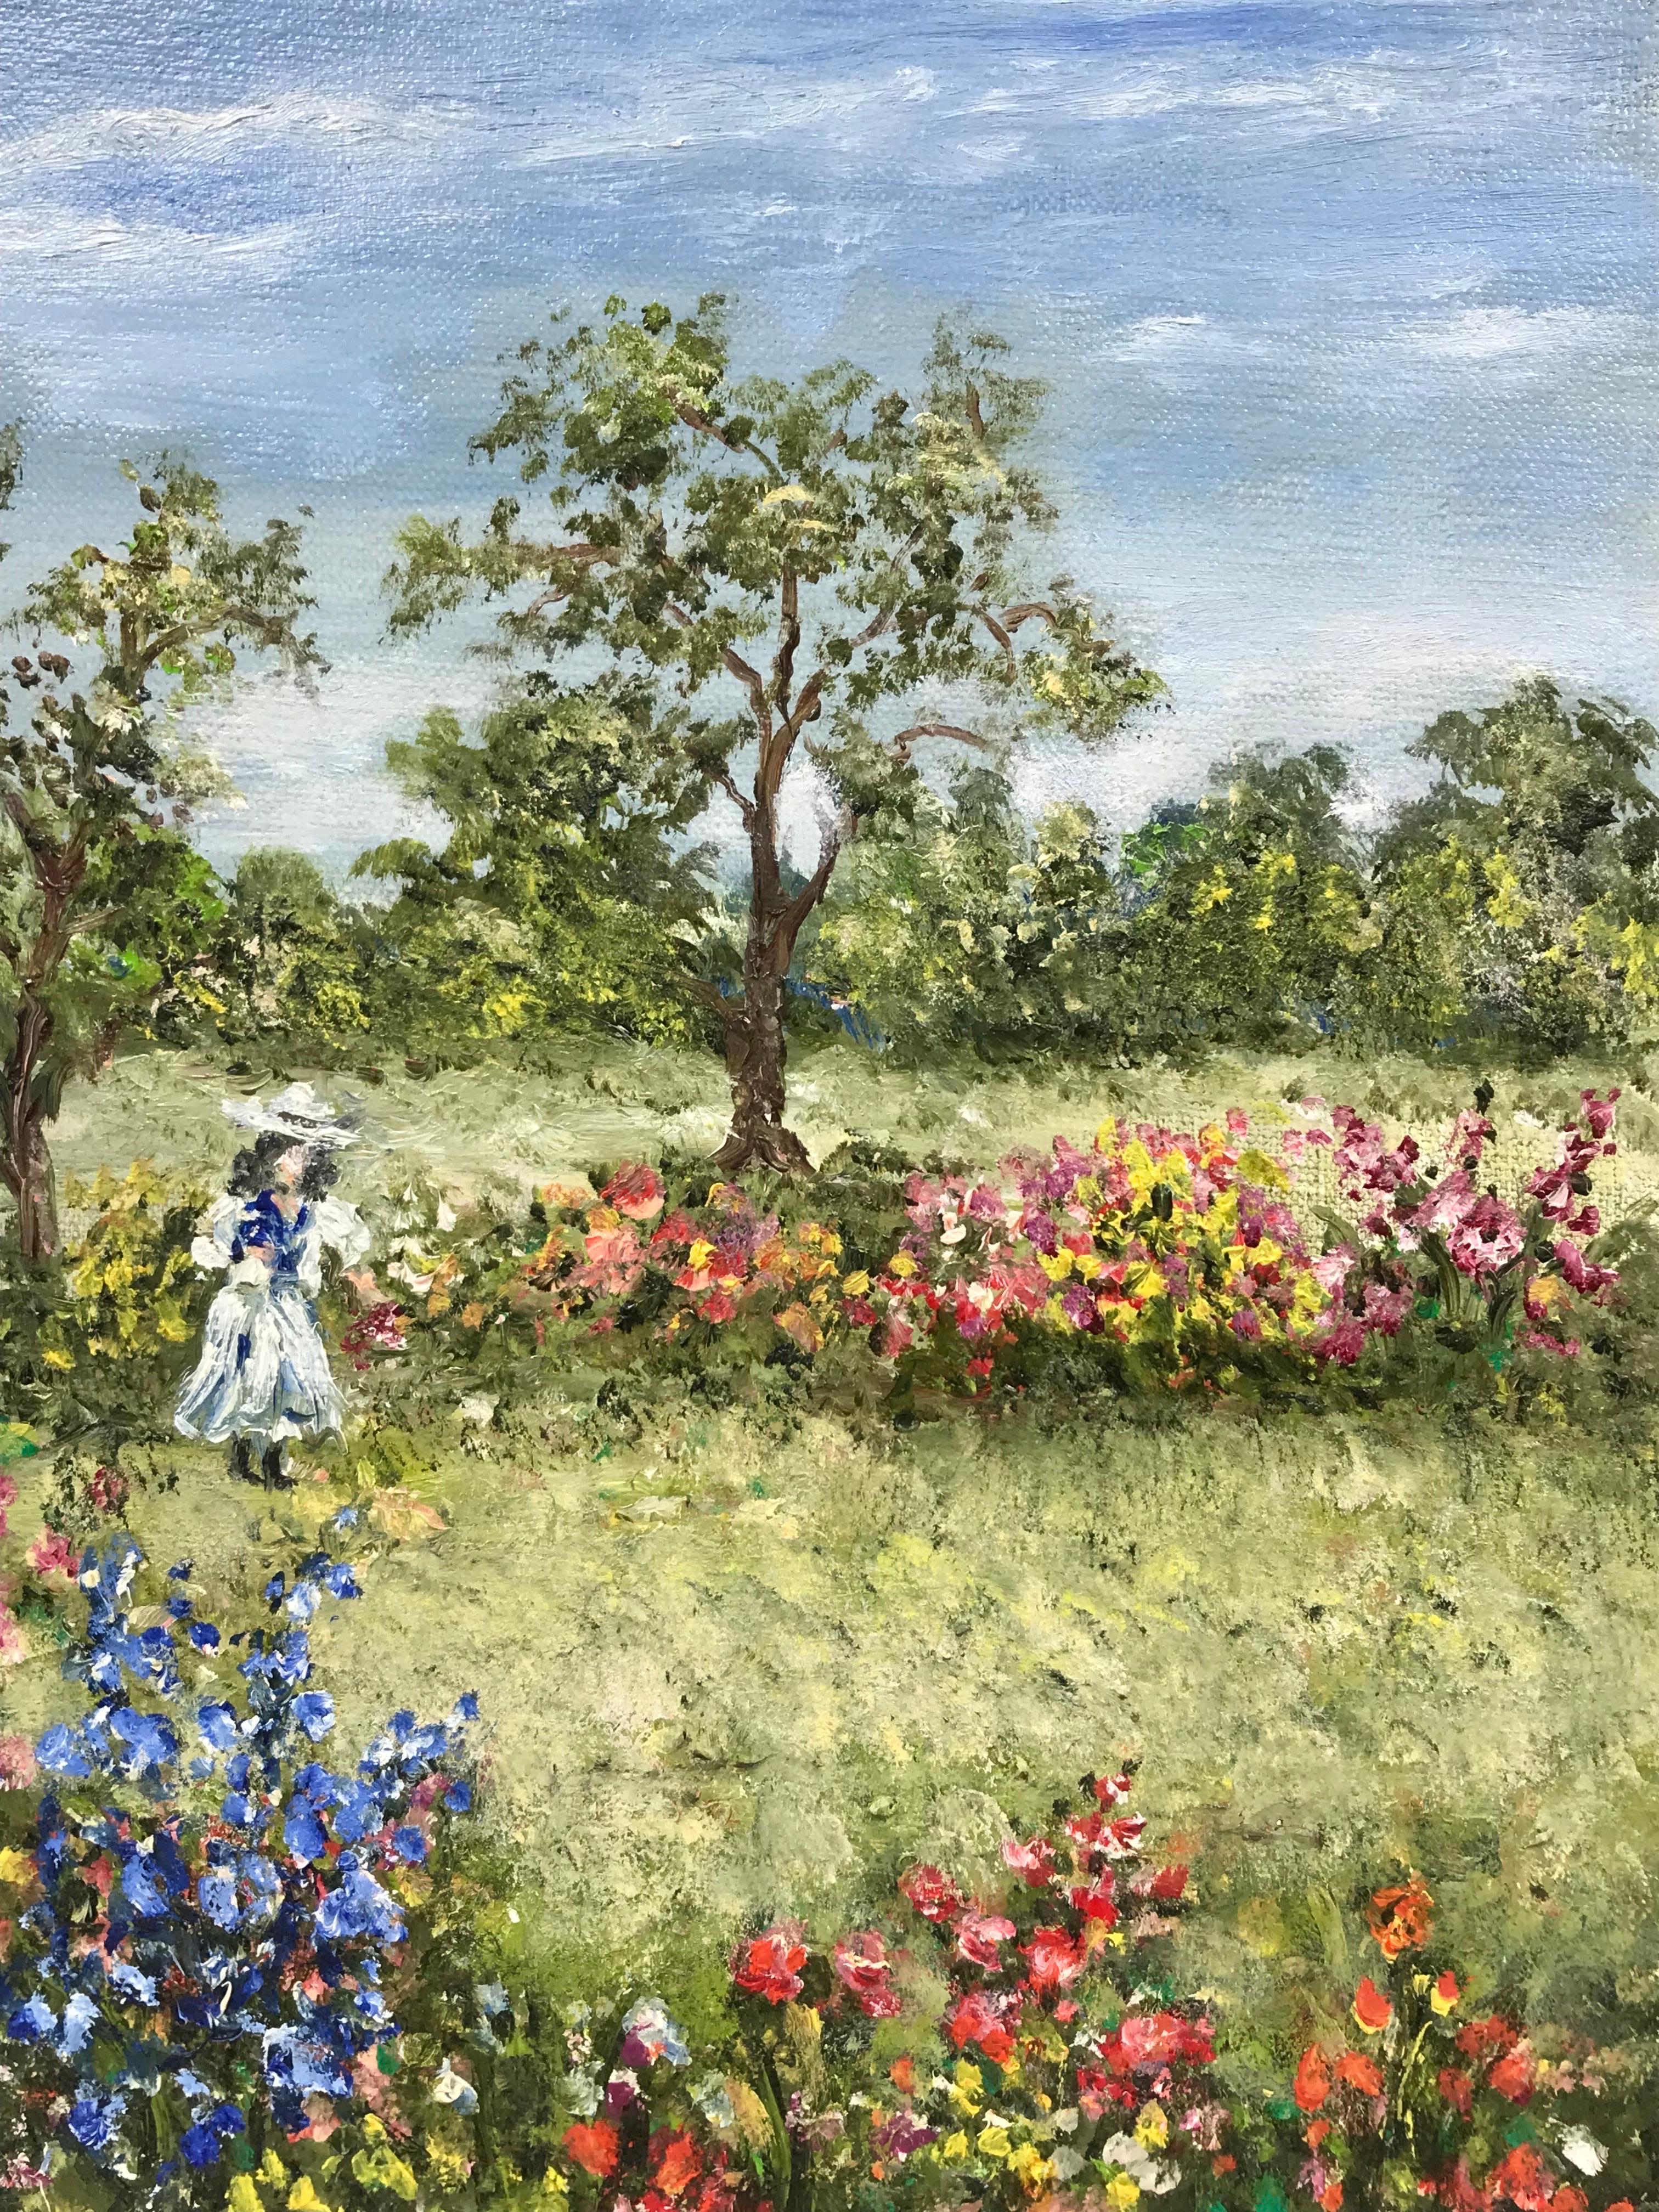 gathering flowers in a french garden